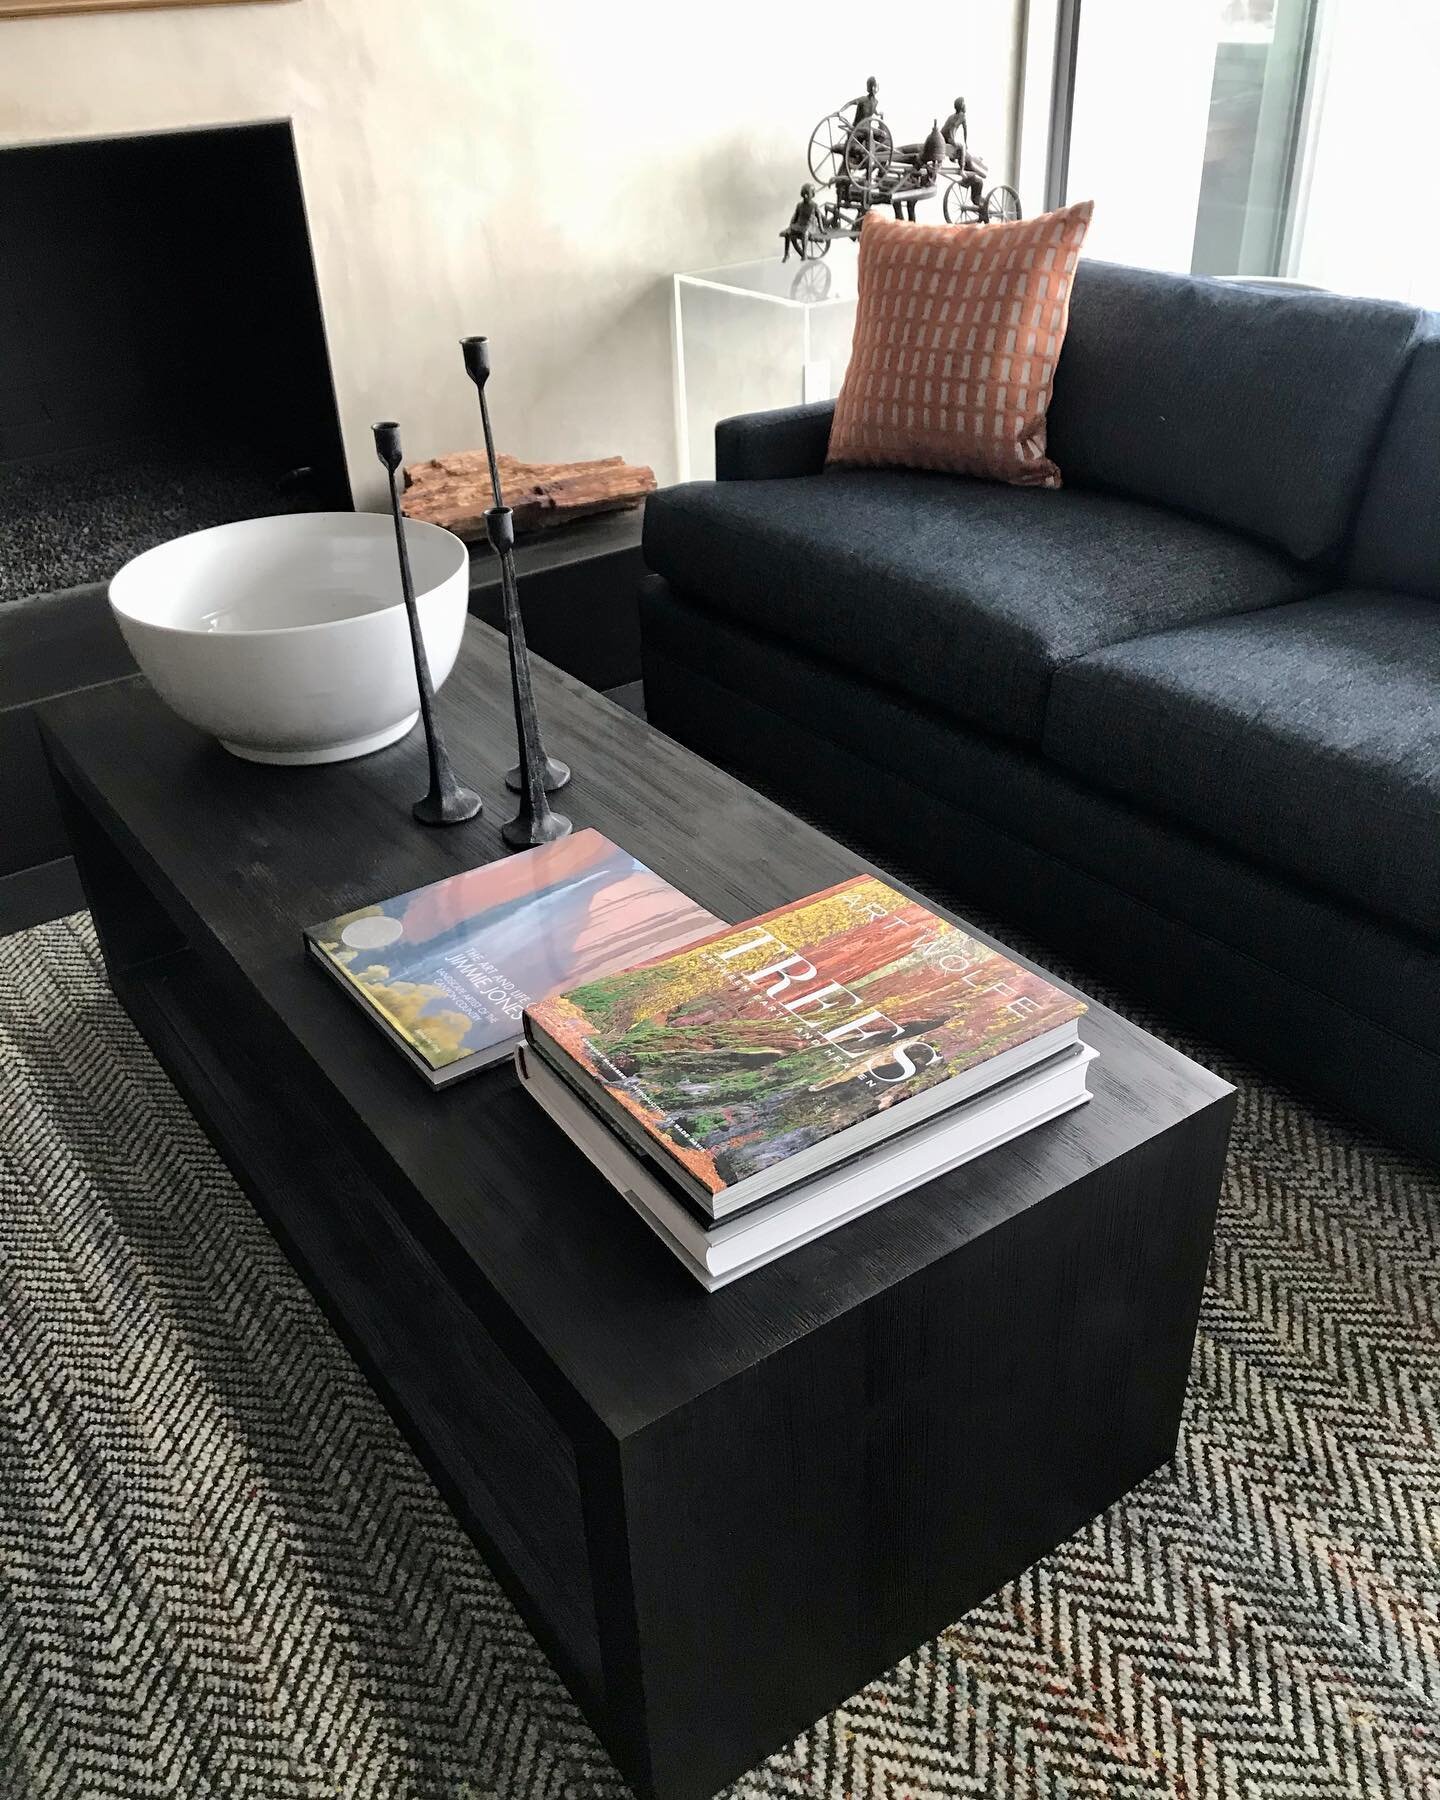 Favorite find of 2020. This 100% wool herringbone rug from @adibs.rug.gallery . It couldn&rsquo;t be more perfect for this exquisite bachelor pad. Design: @digyourdigs.
.
.
.
.
.
#julieassenberginteriordesign  #bachelorpaddecor  #digyourdigs  #theart